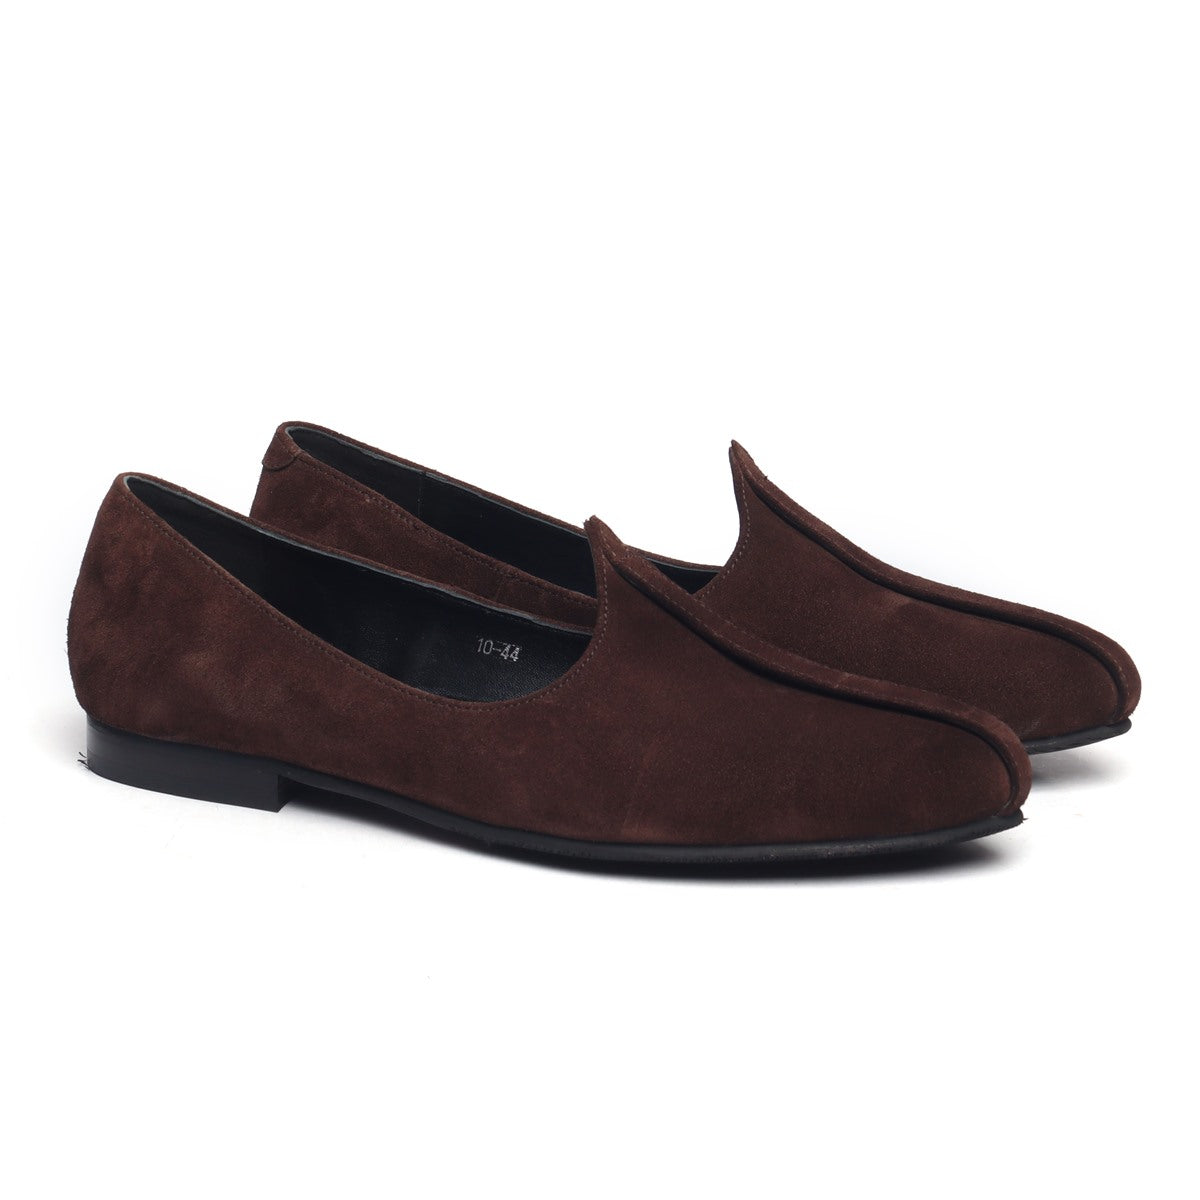 Brown Suede Leather Jalsa Jutti By Bareskin